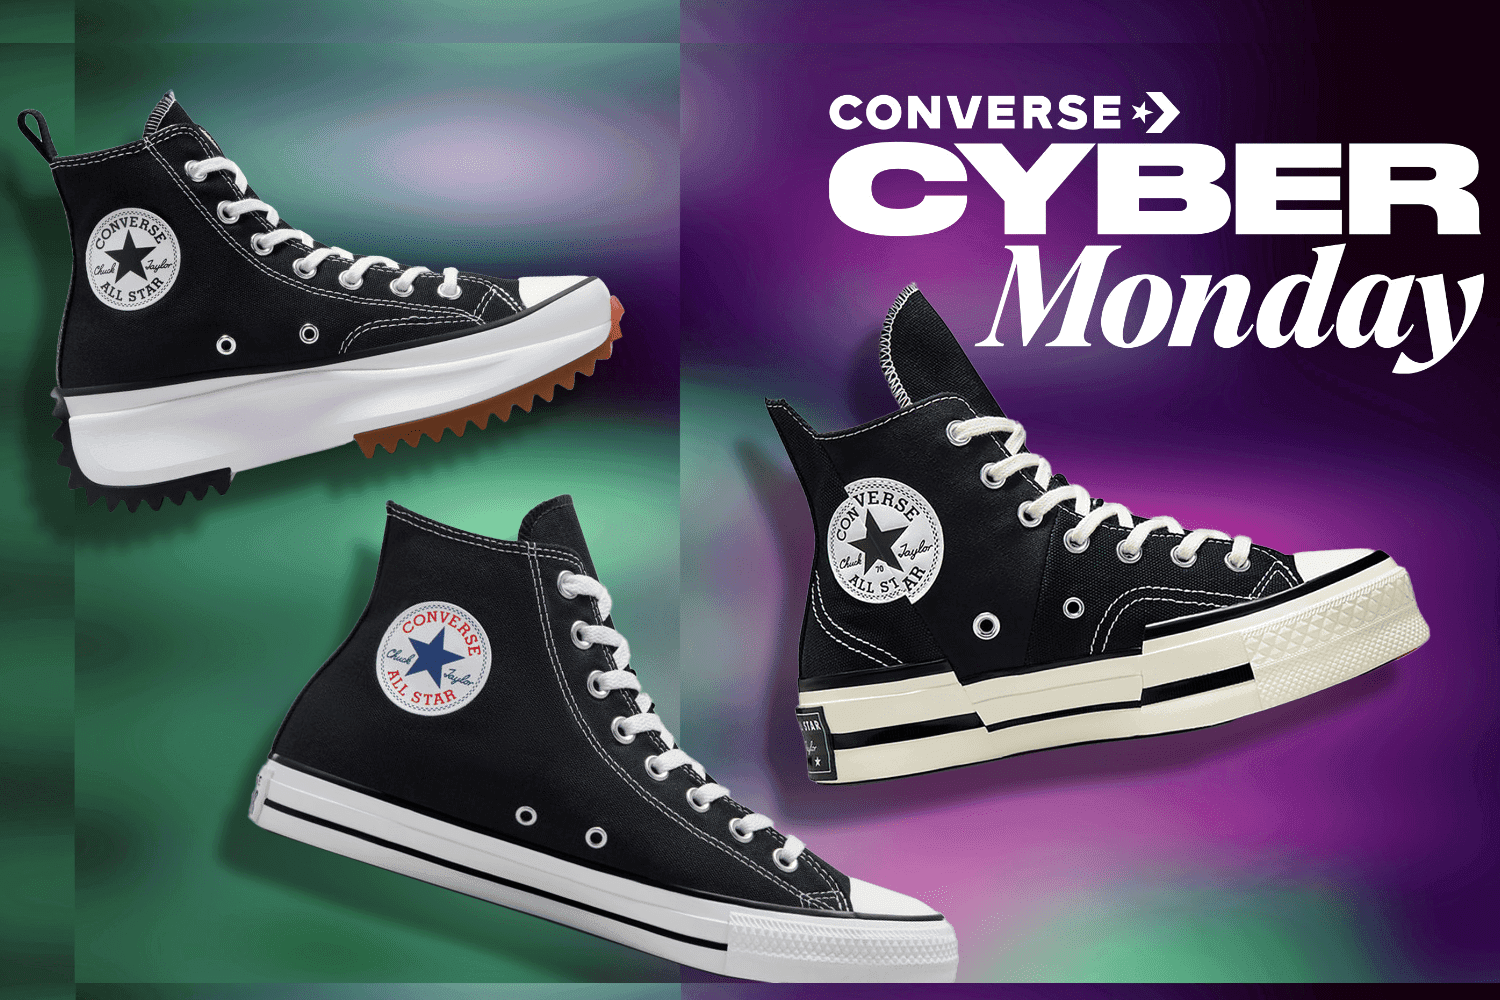 Save up to 40% on Converse bestsellers and more during Cyber Week